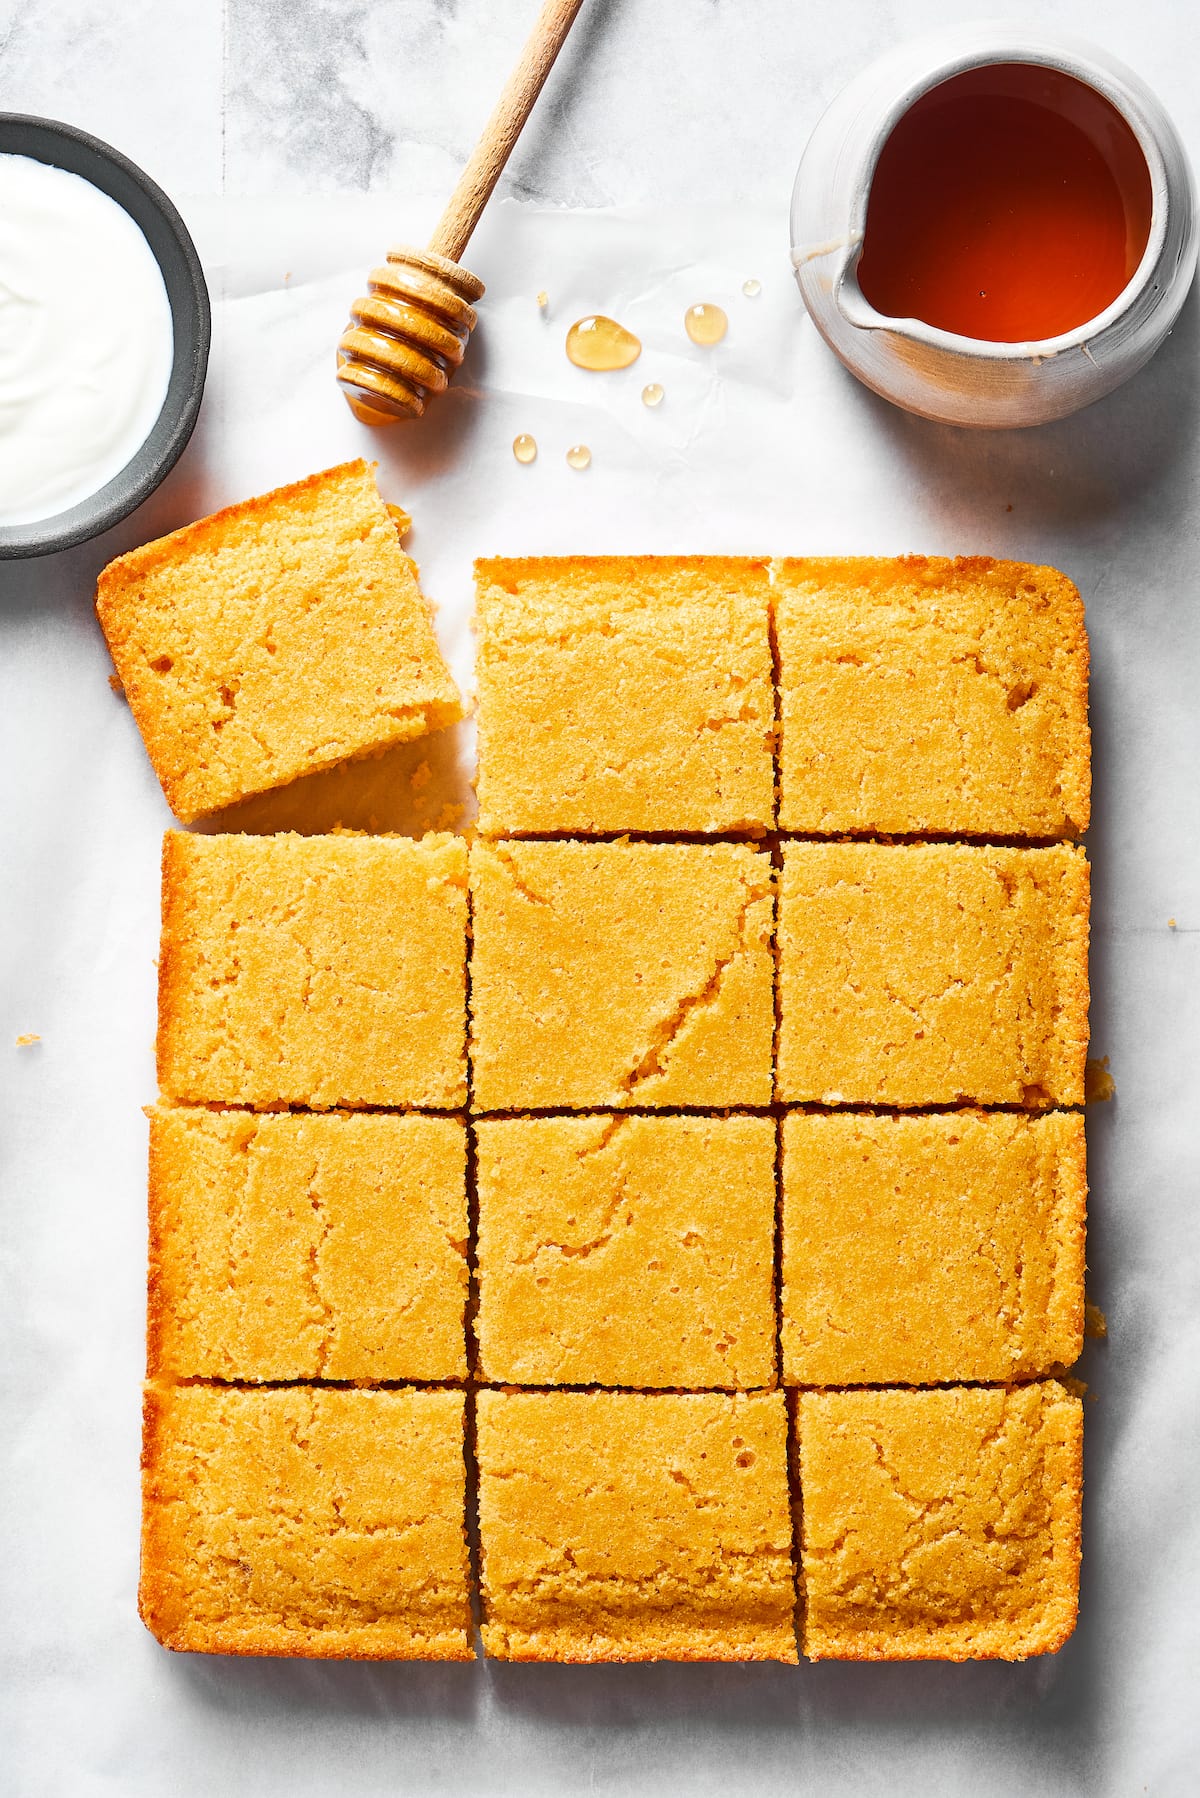 Cornbread cut into 12 pieces, with one corner askew, next to a jar of honey and a honey stirrer